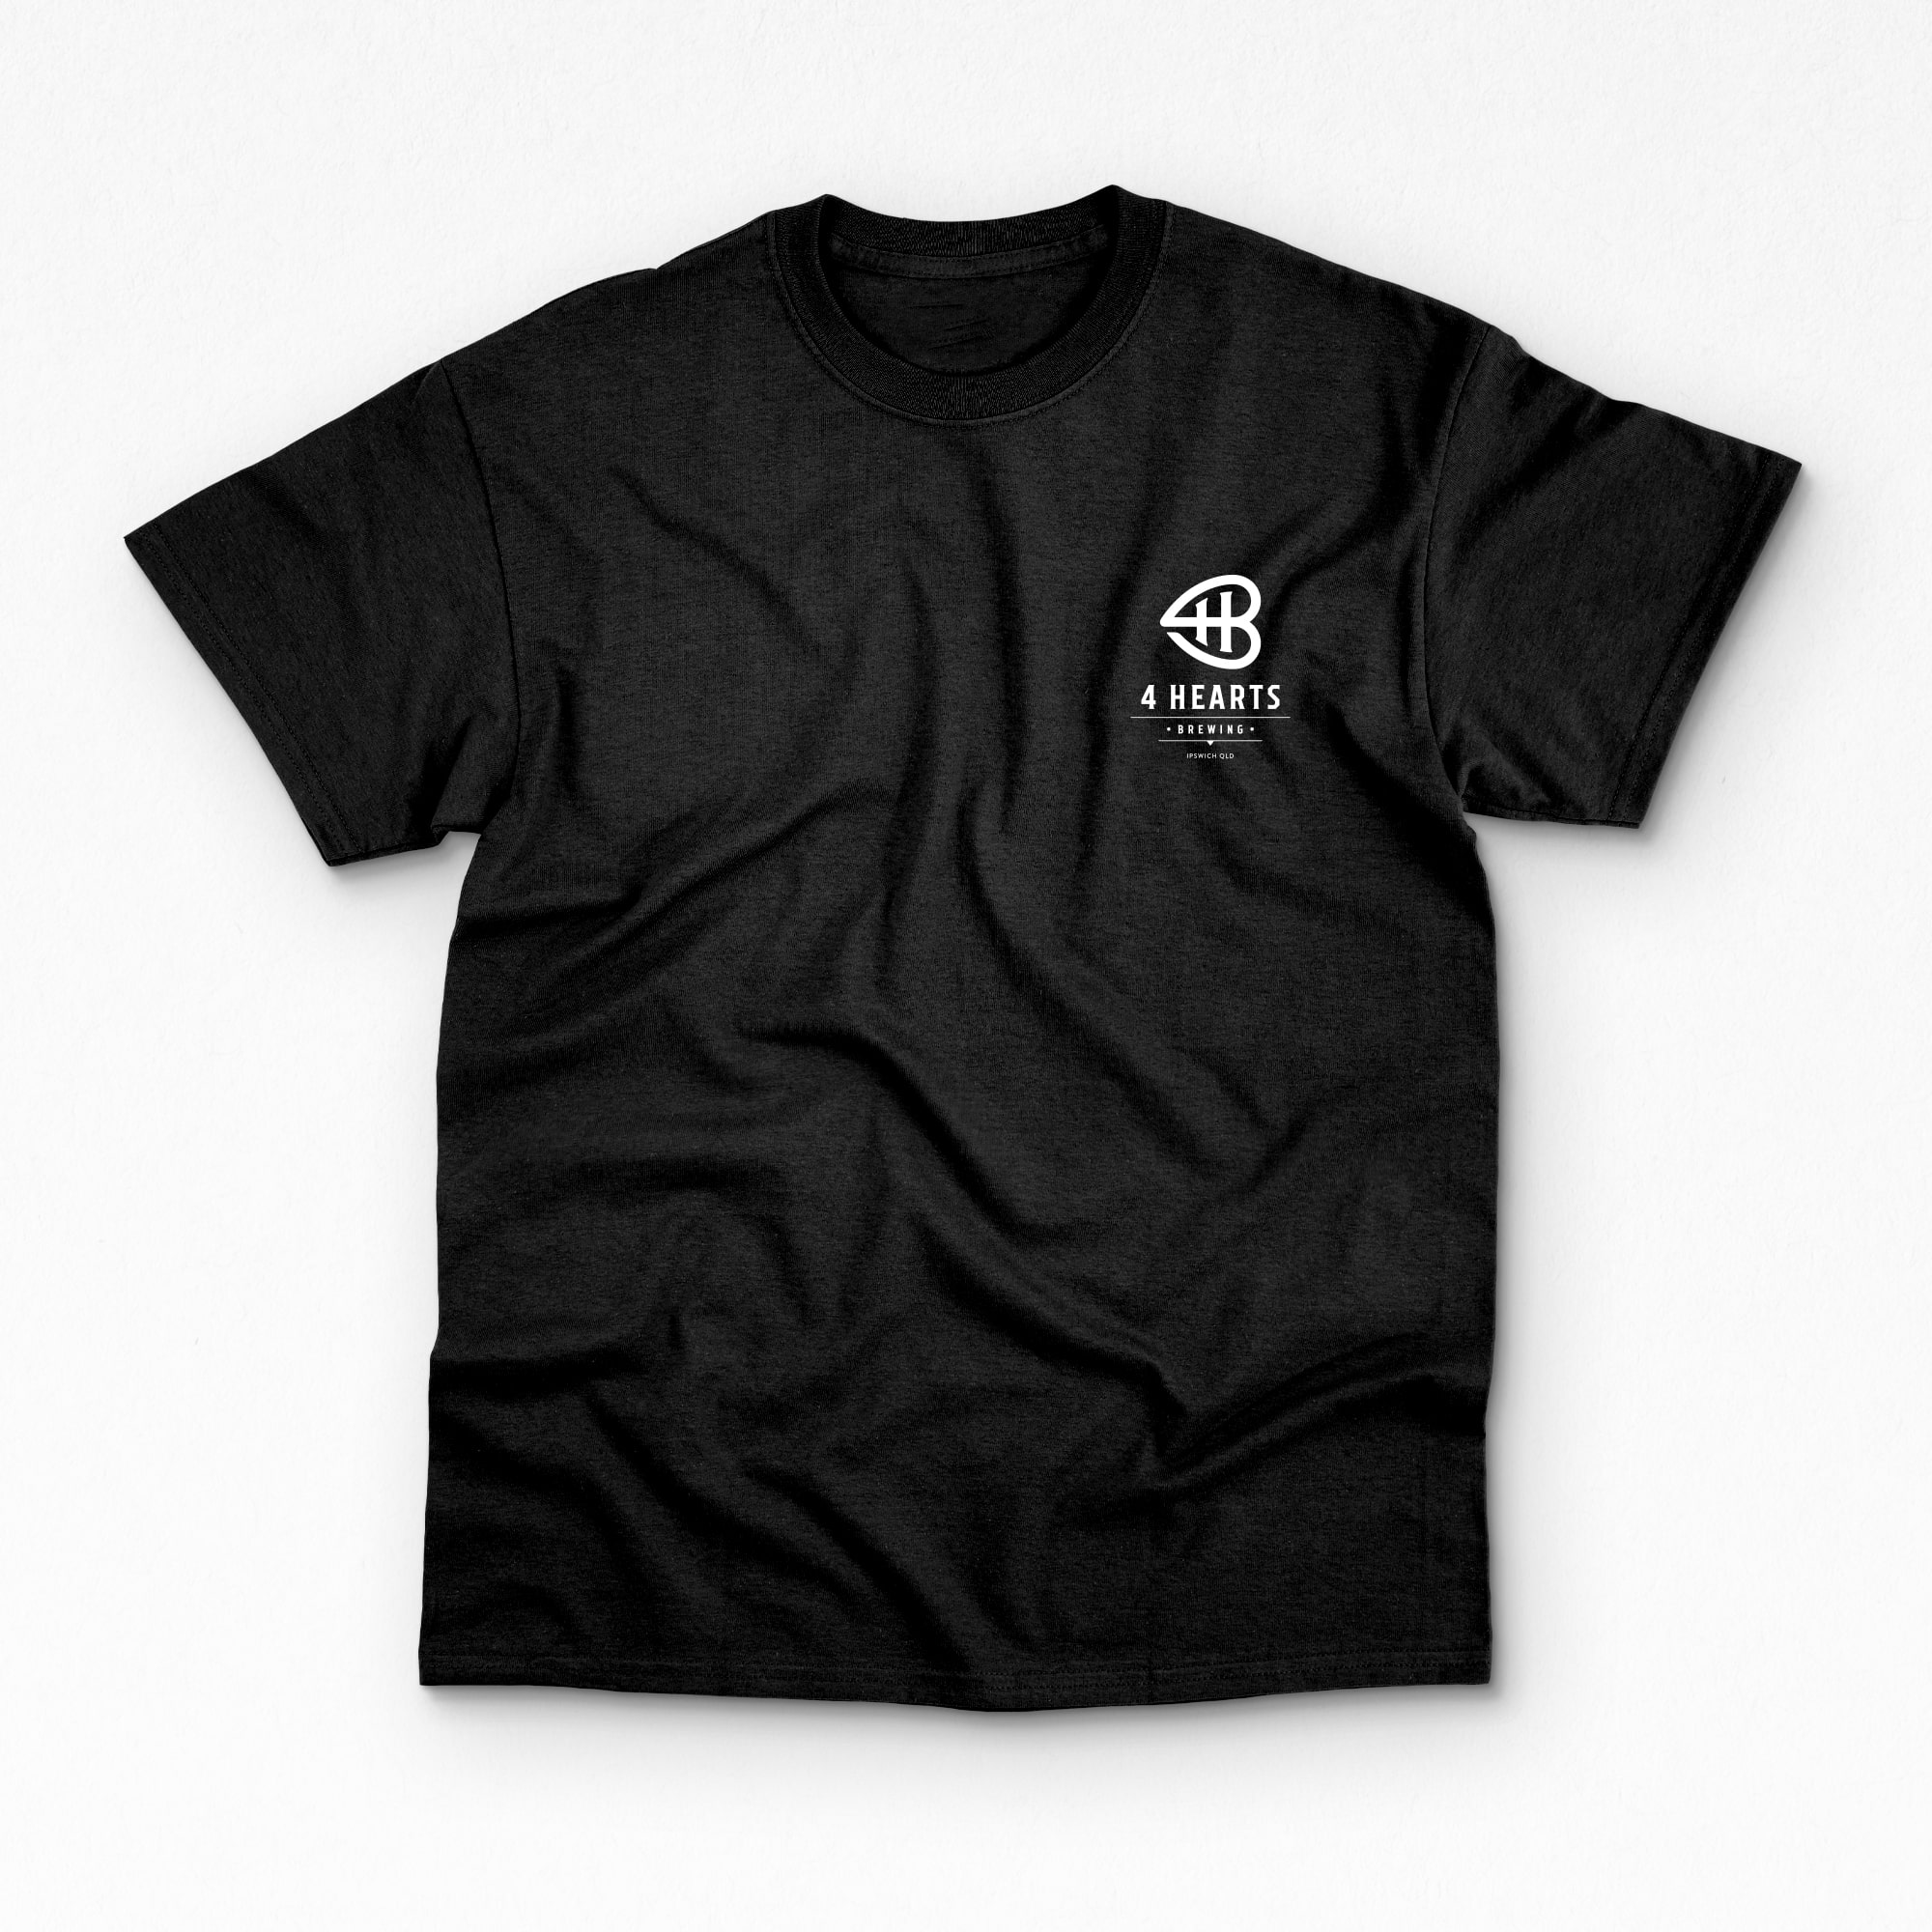 A front view of a 4 Hearts black shortsleeve t-shirt featuring the 4 Hearts logo on the chest.